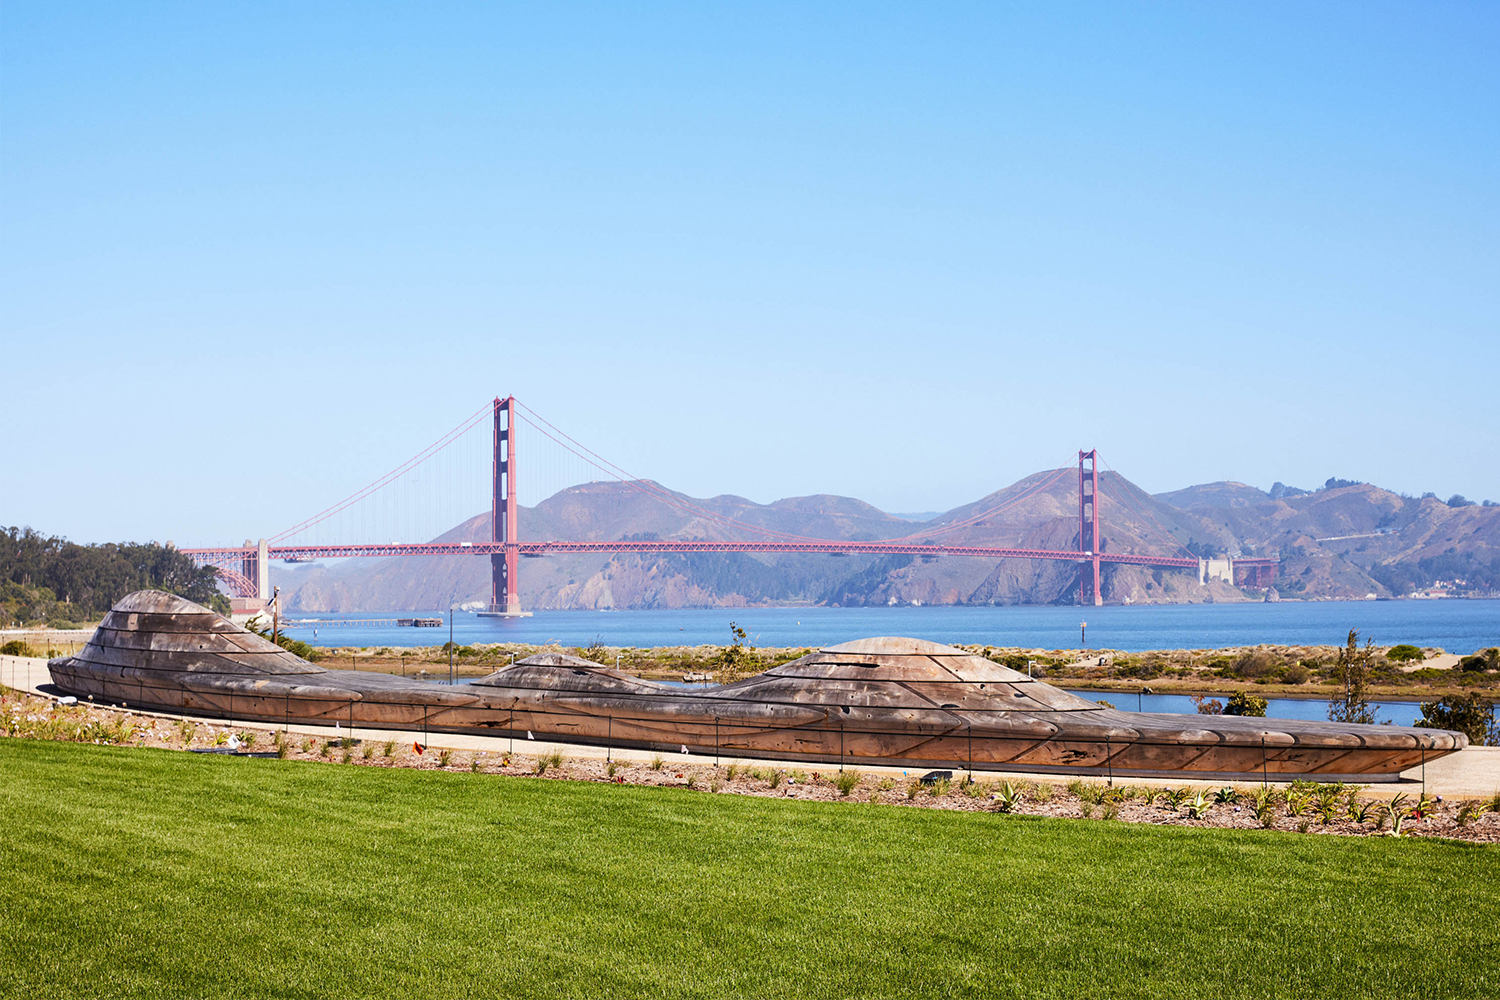 A view of the Golden Gate Bridge from the new Presidio Tunnel Tops park